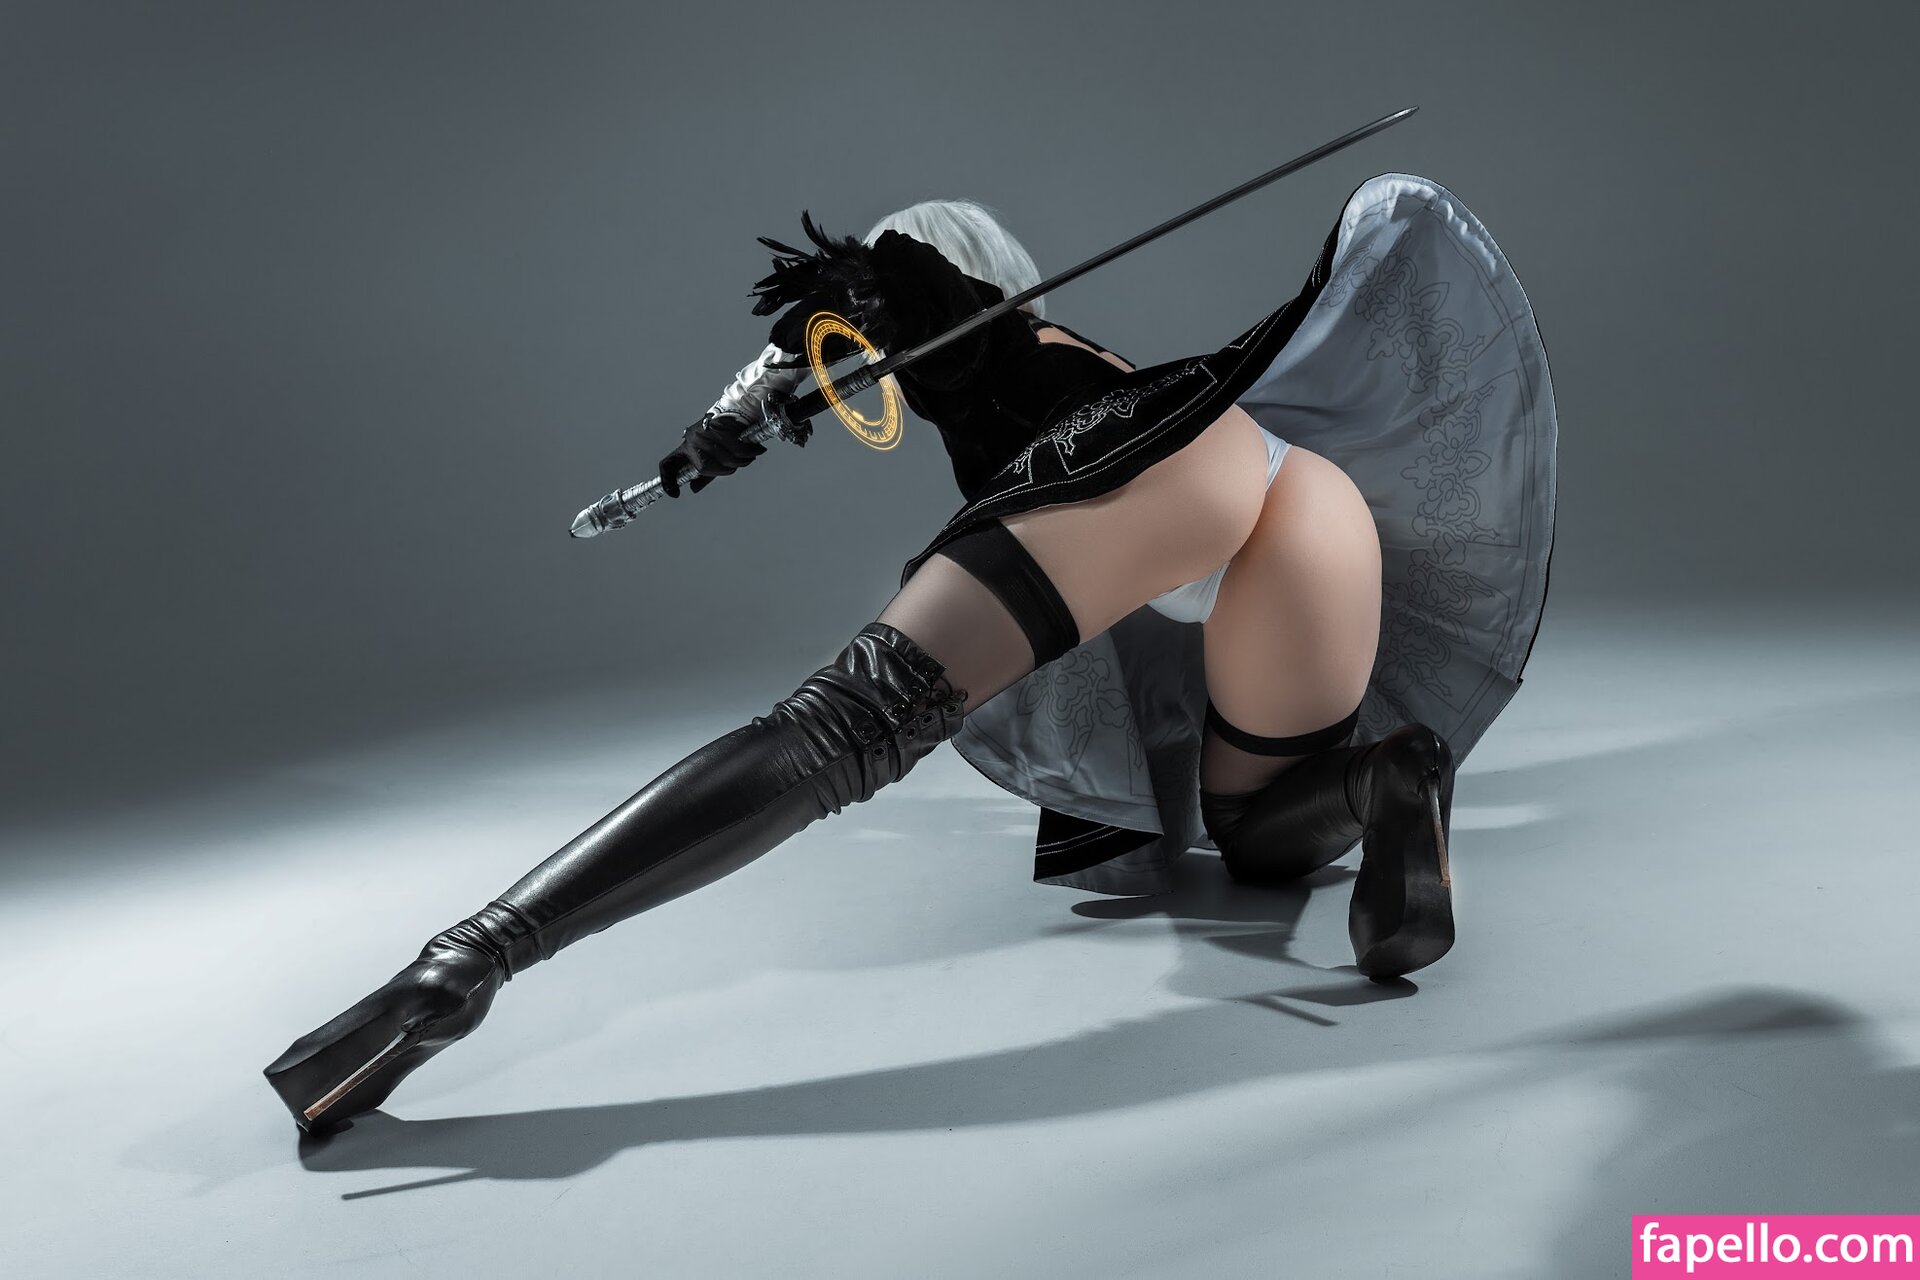 2b cosplay nude: the ultimate mix of fantasy and desire